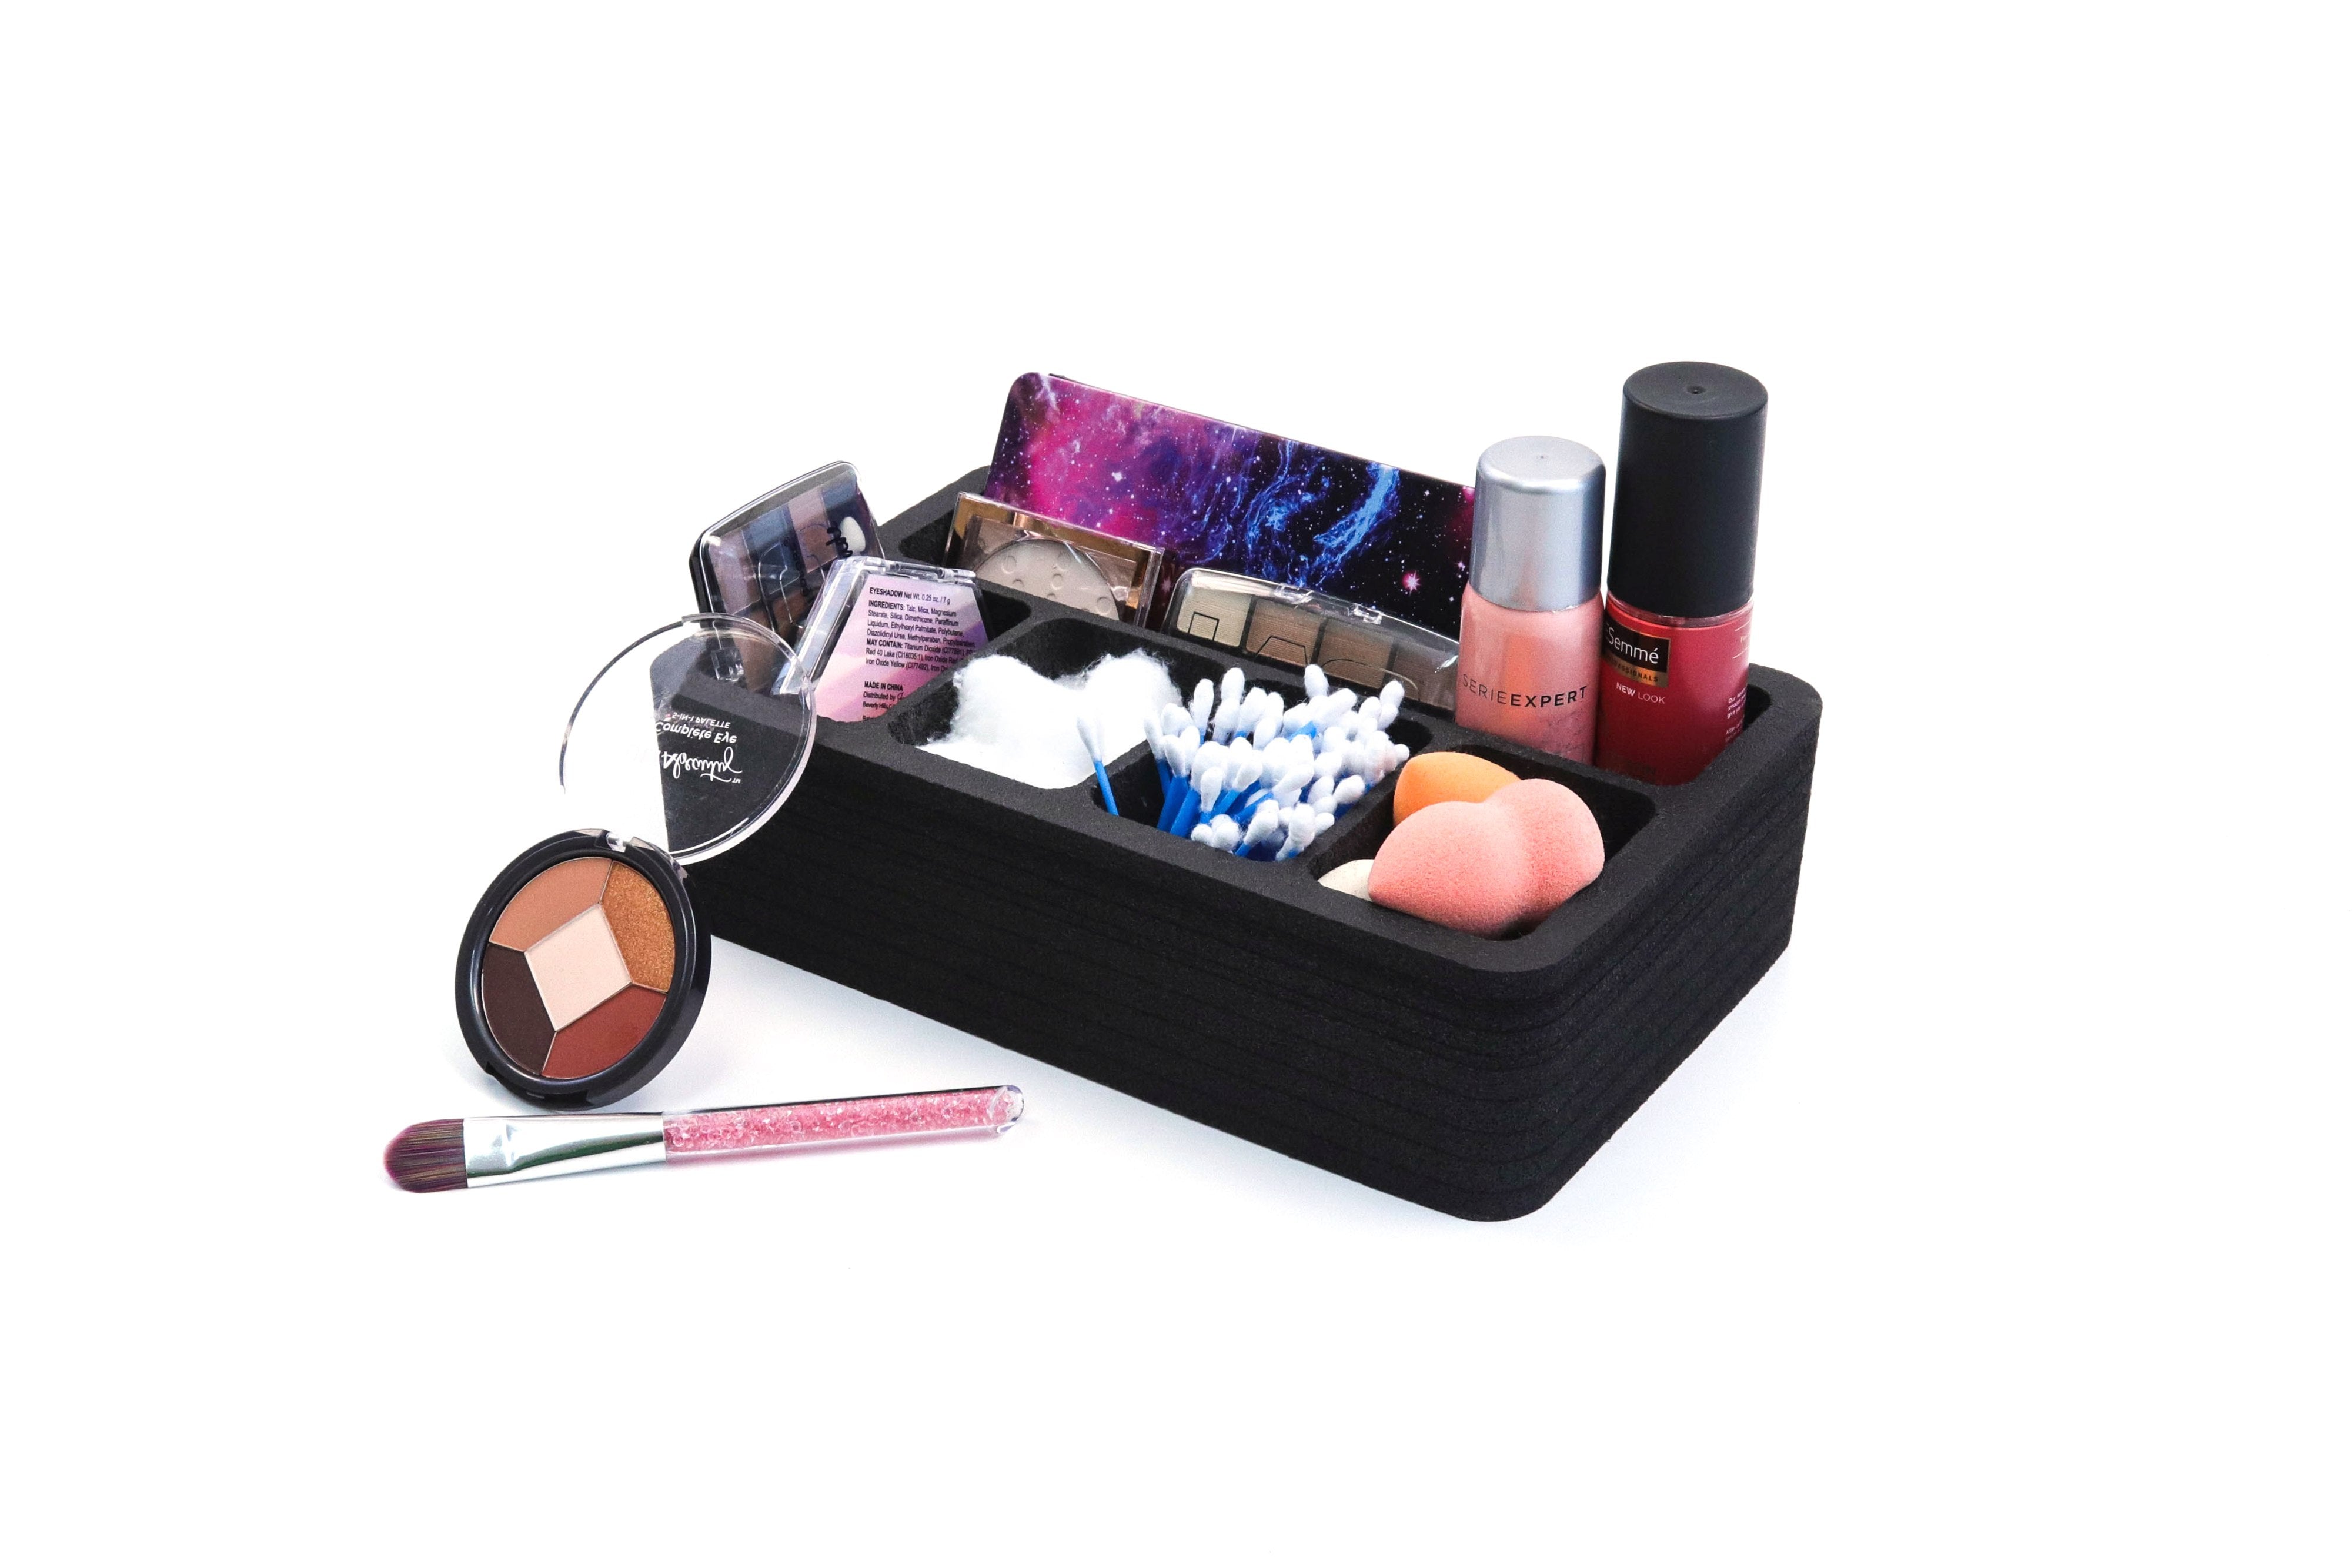 Vanity Organizer Makeup Beauty St Holder for Brushes, Lip Gloss, Eye Liner More Home Bathroom Bedroom Salon 11 x 7 Inches 5 Compartments